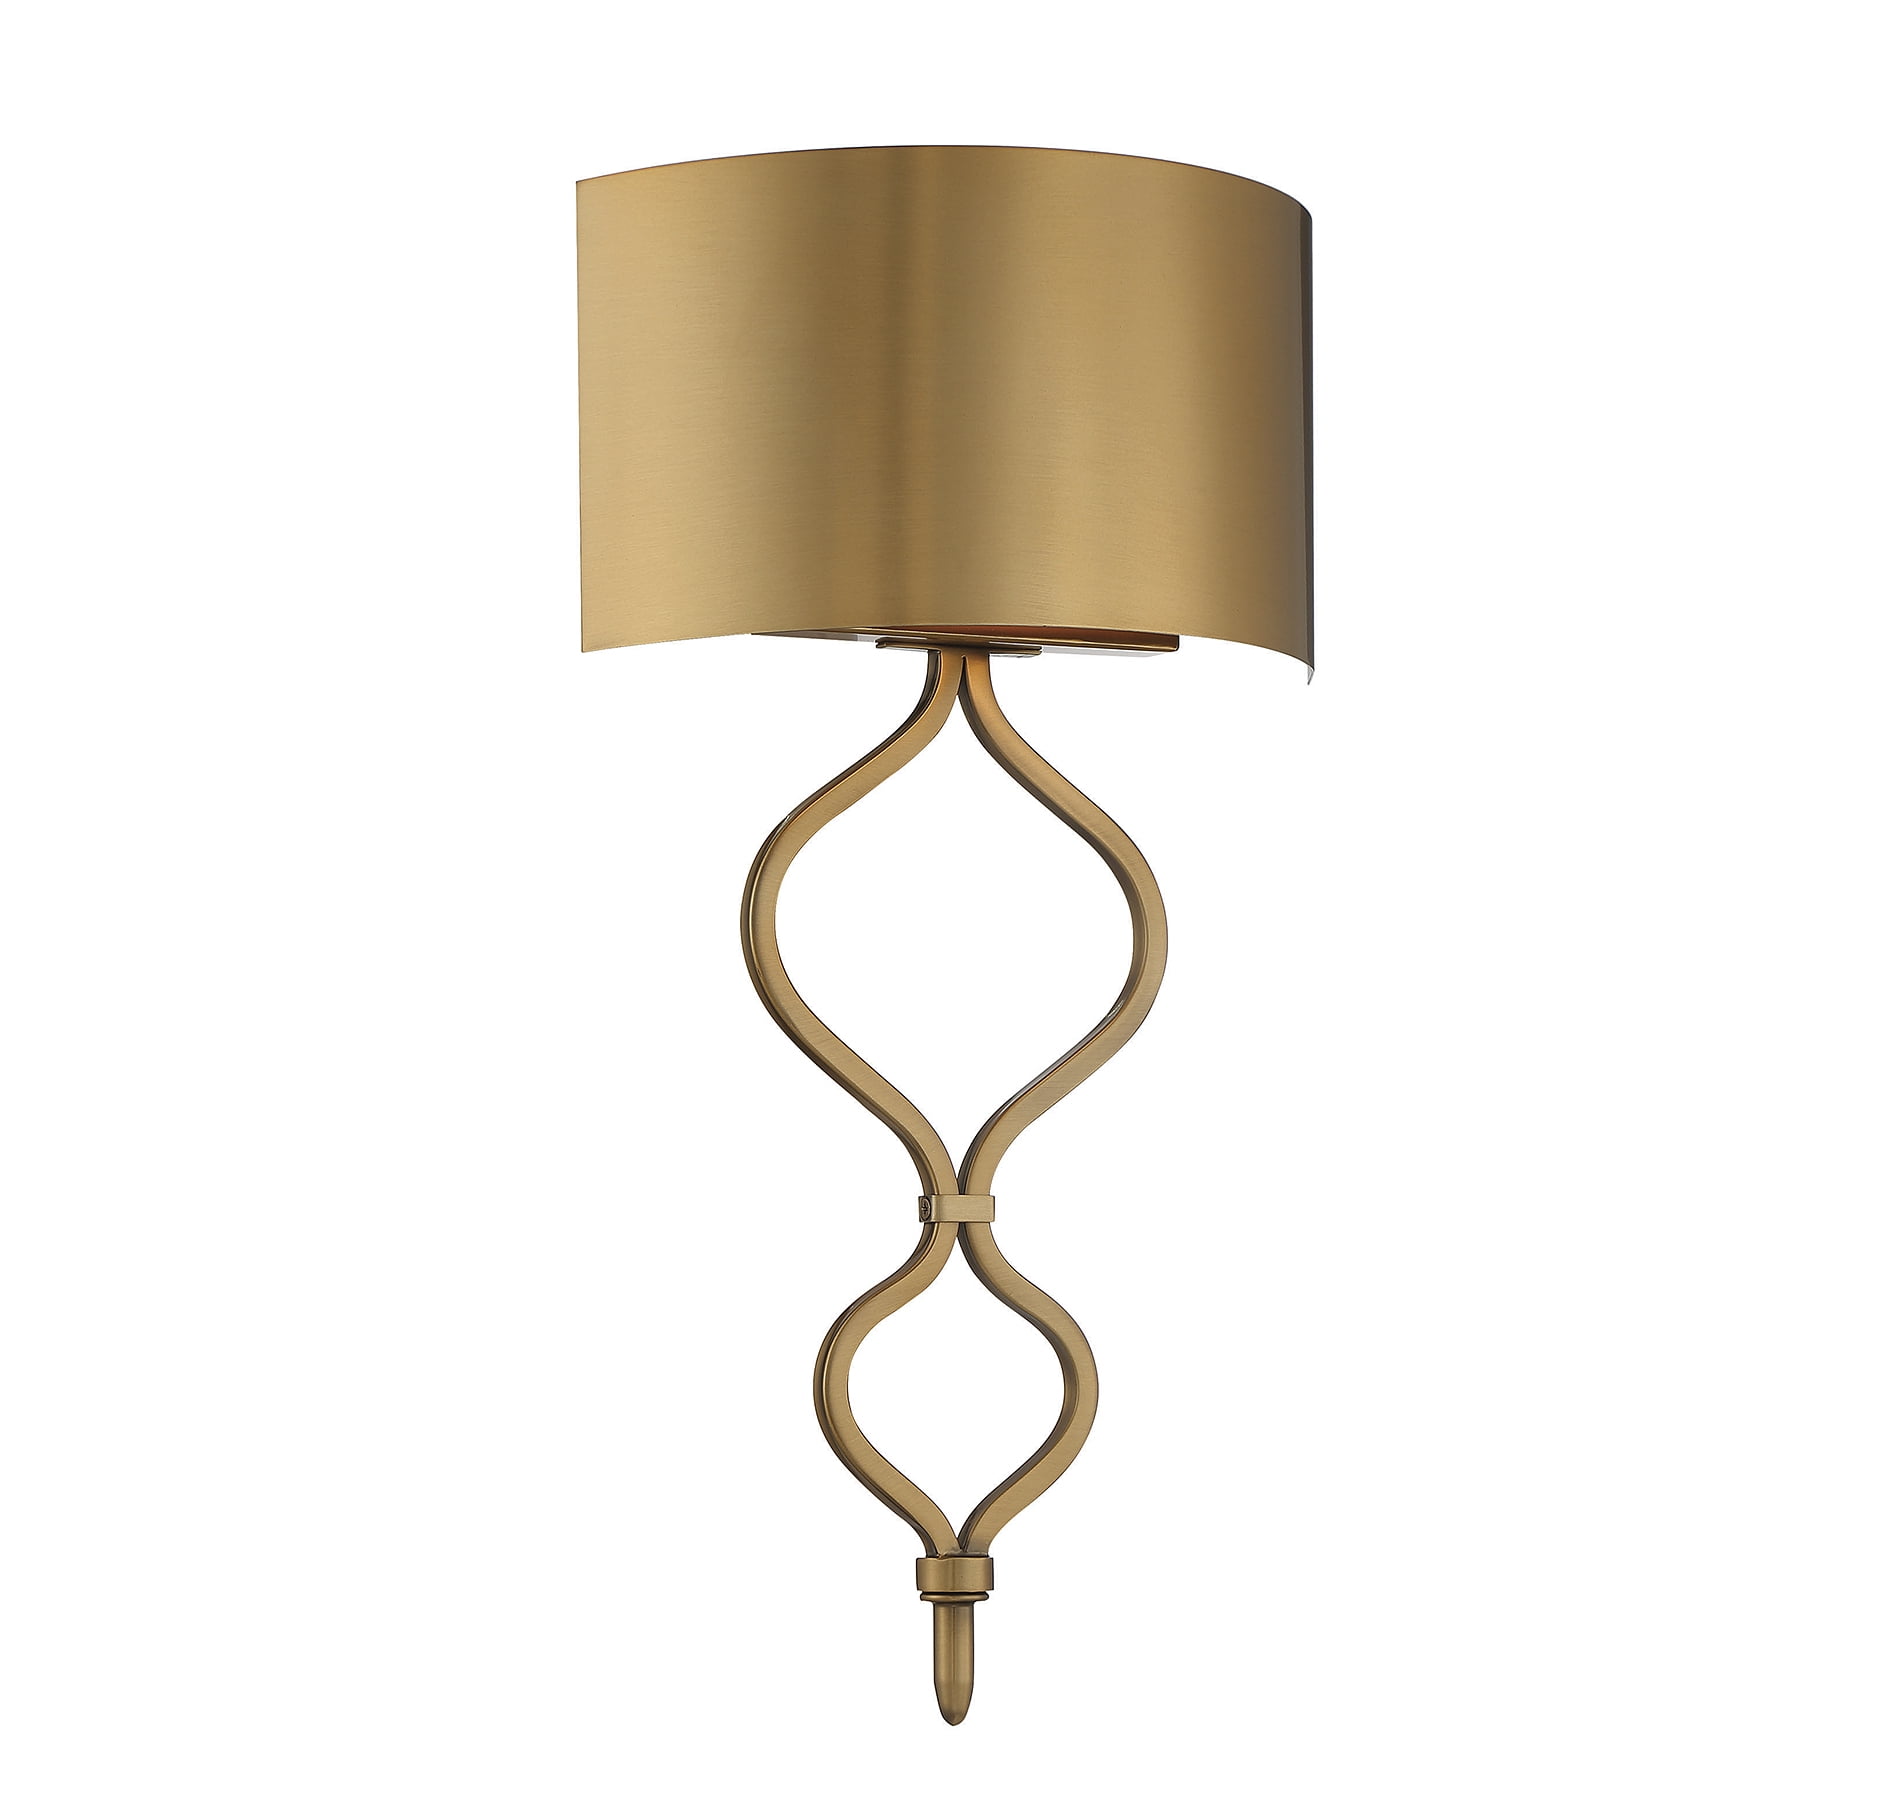 12 W x 13H Savoy House 5-179-137 Belmont Wall Sconce in Textured Black with Warm Brass Accents